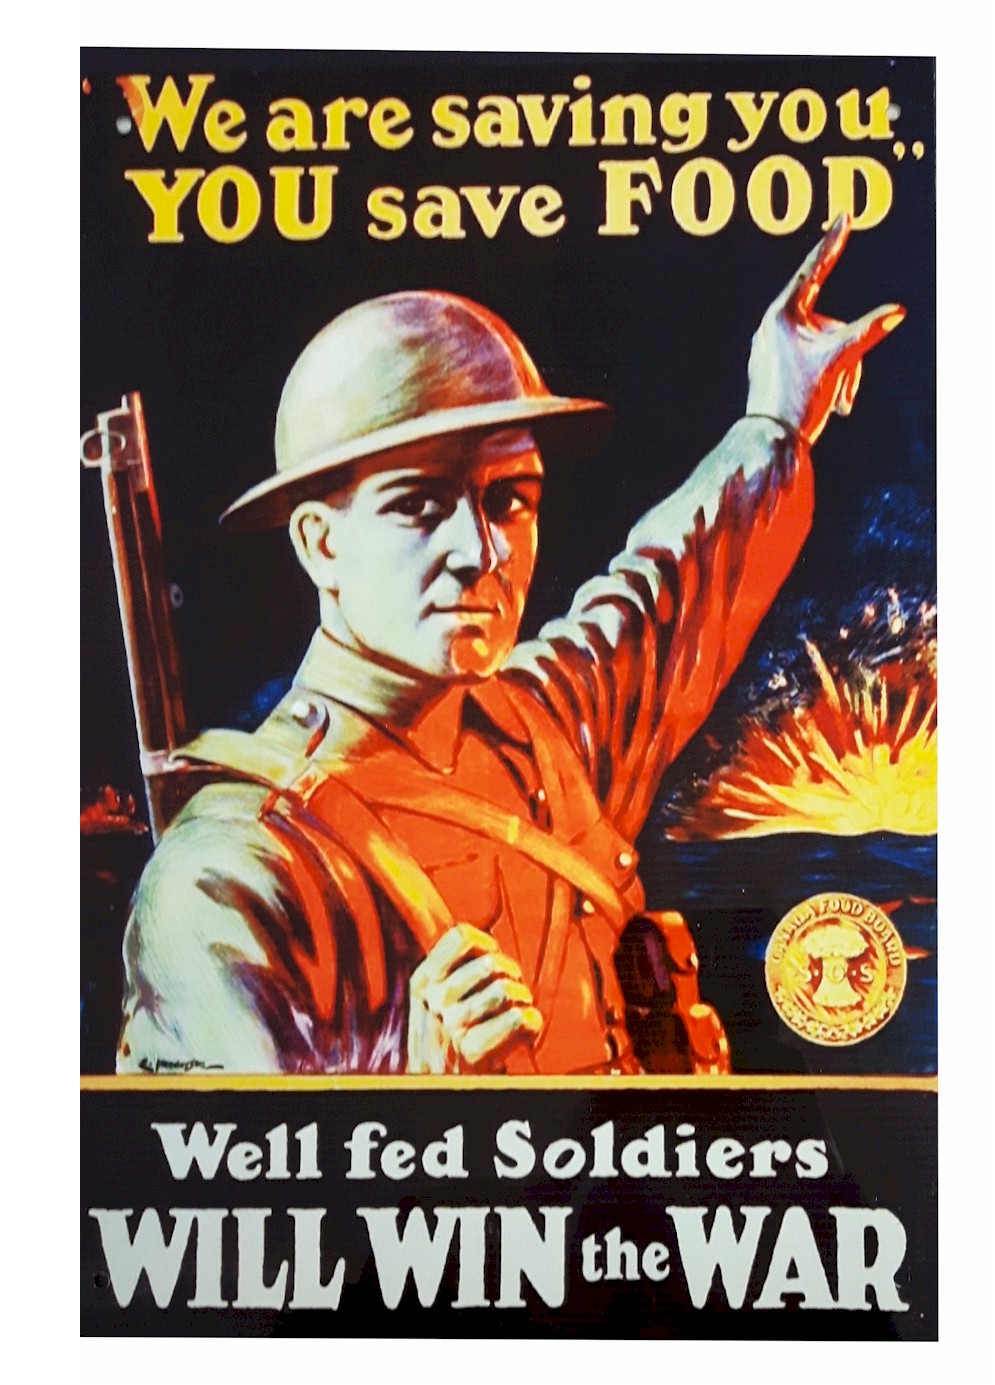 WE ARE SAVING YOU, YOU SAVE FOOD, WELL FED SOLDIERS WILL WIN THE WAR METAL SIGN